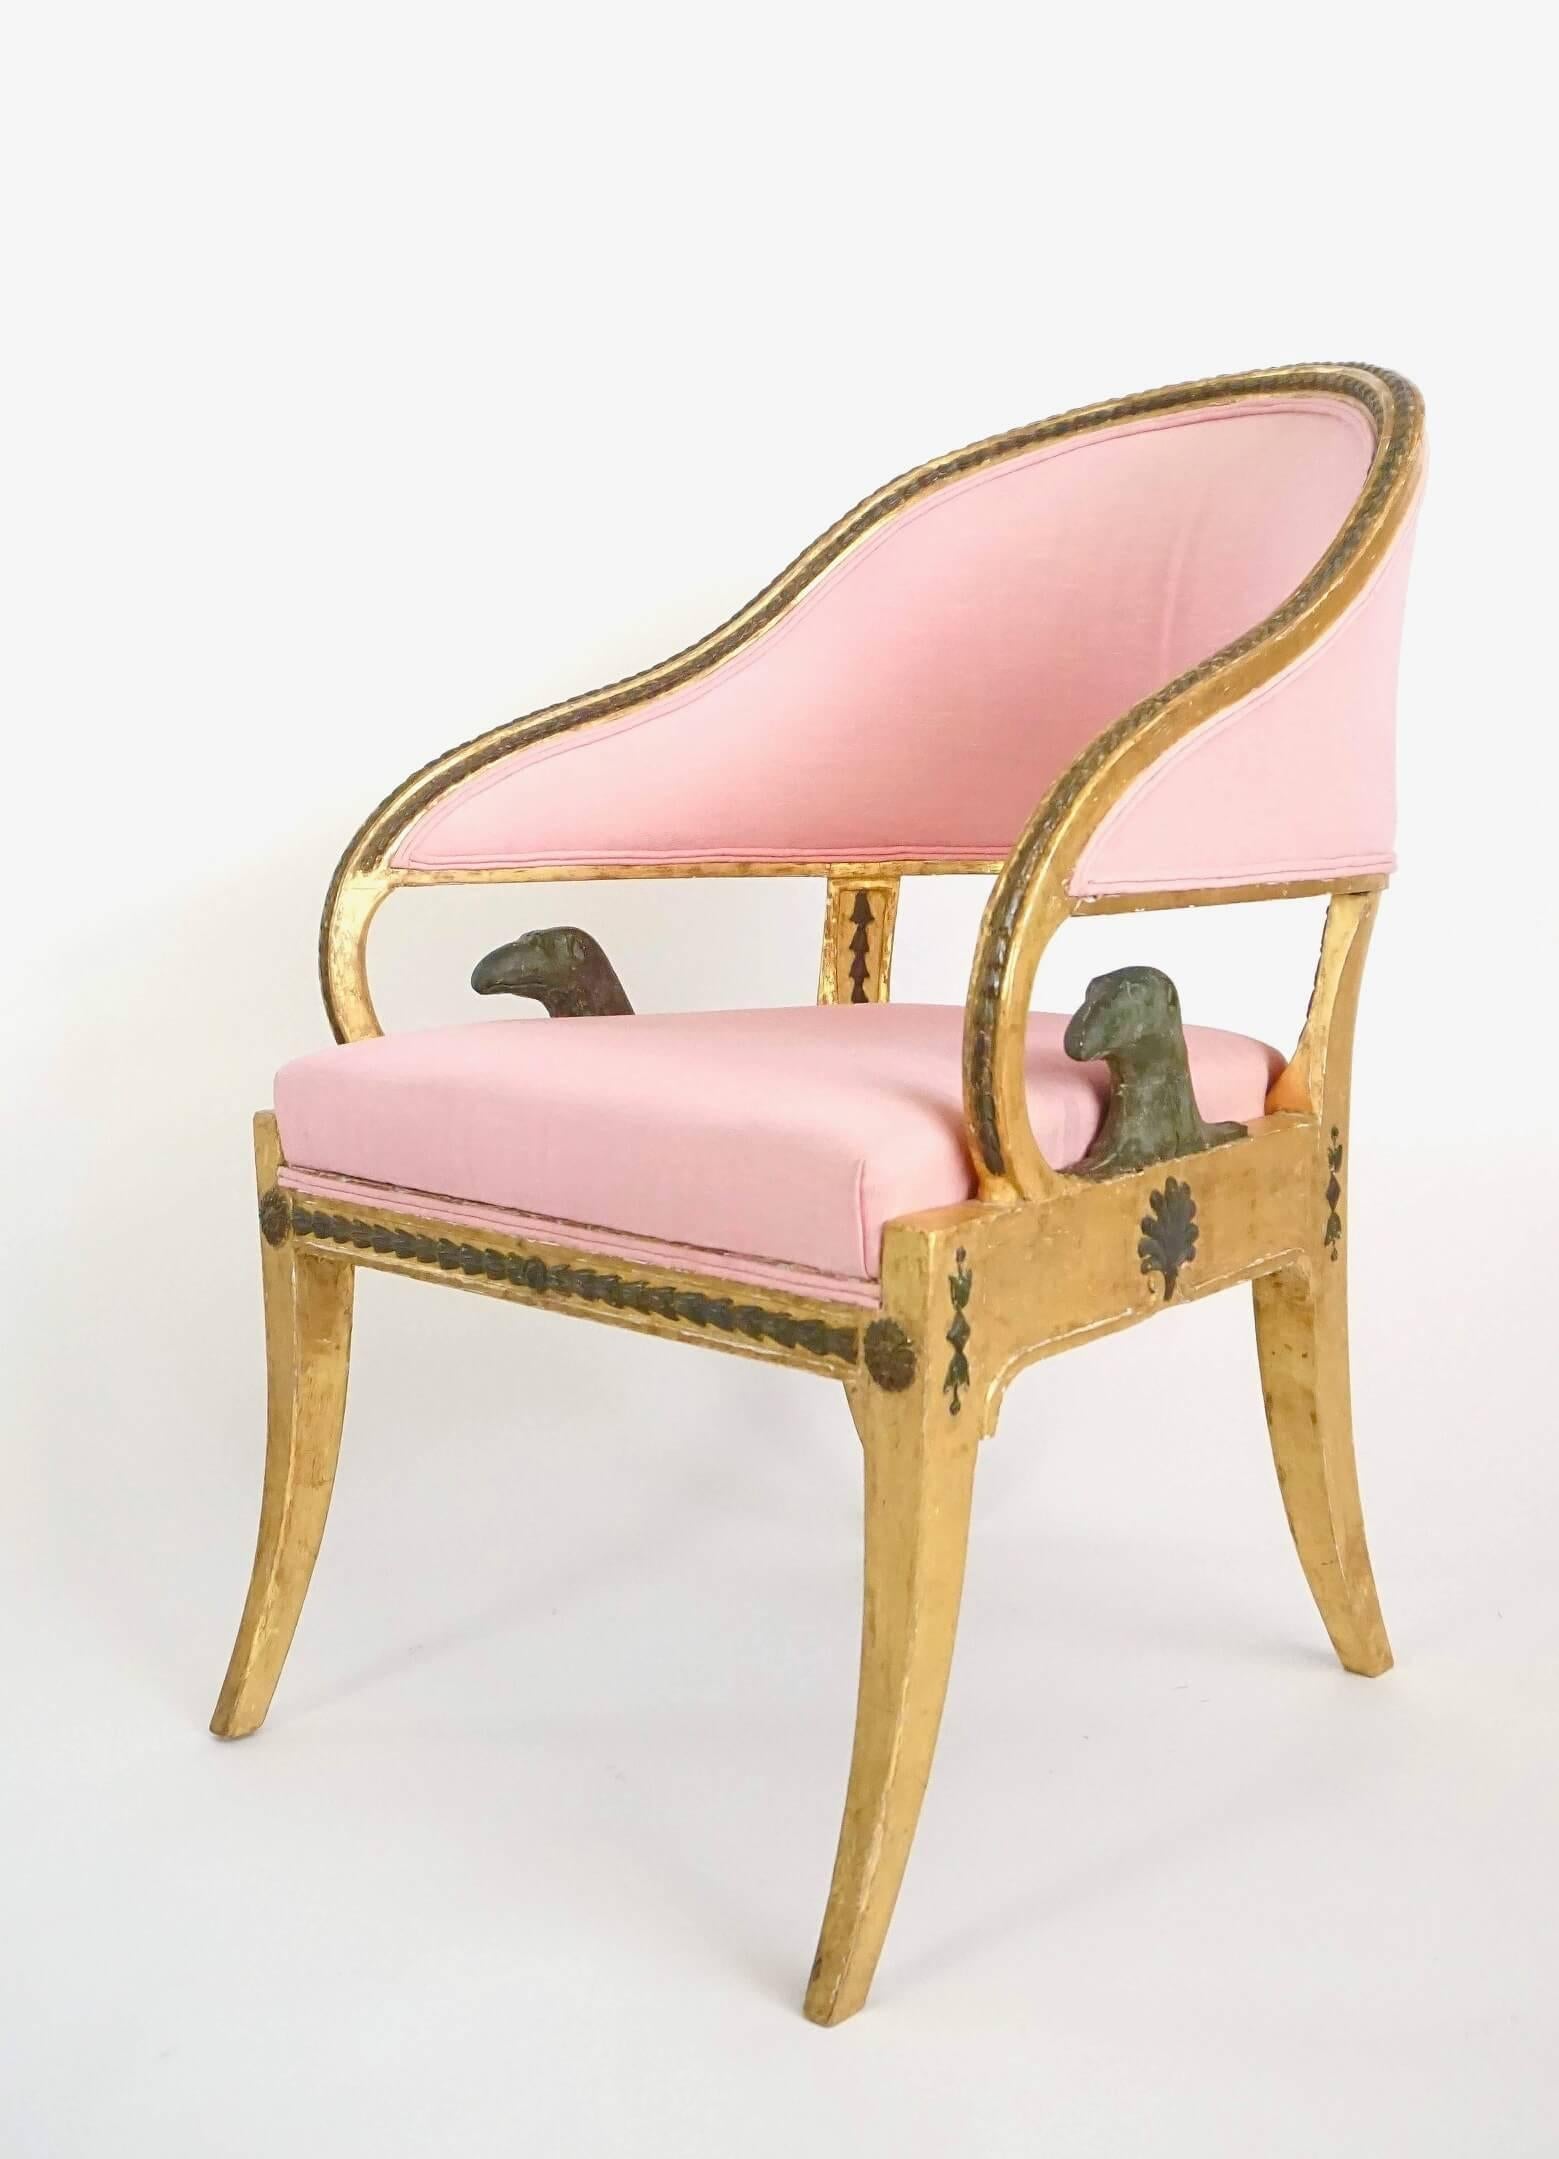 Hand-Carved Swedish Gustavian Neoclassical Giltwood Fauteuil by Ephraim Ståhl, circa 1800 For Sale